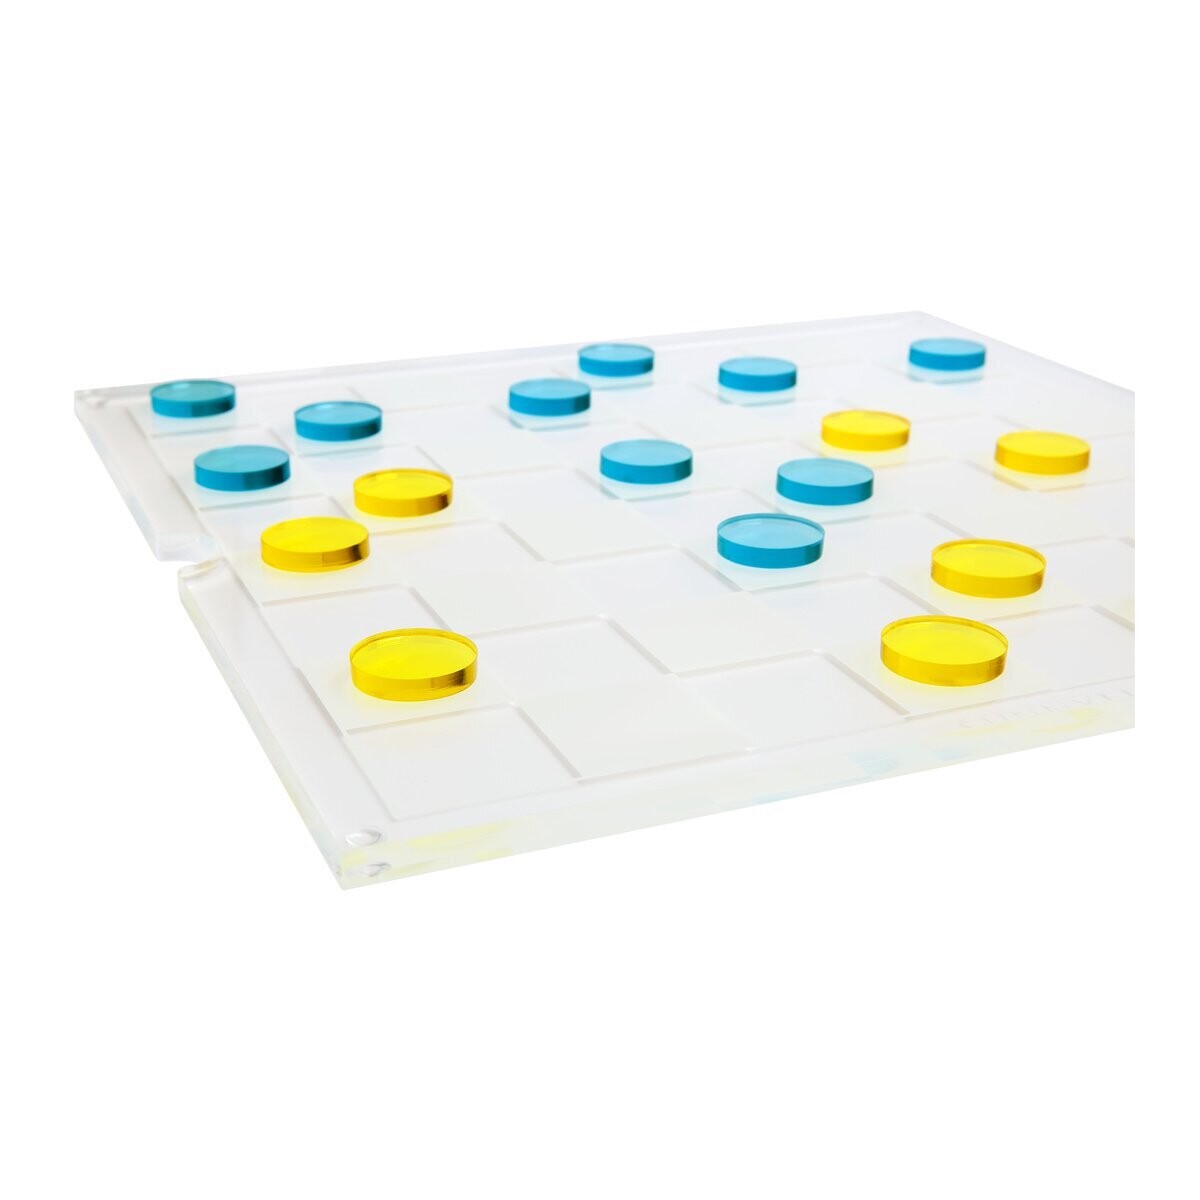 Lucite Chess/Checkers